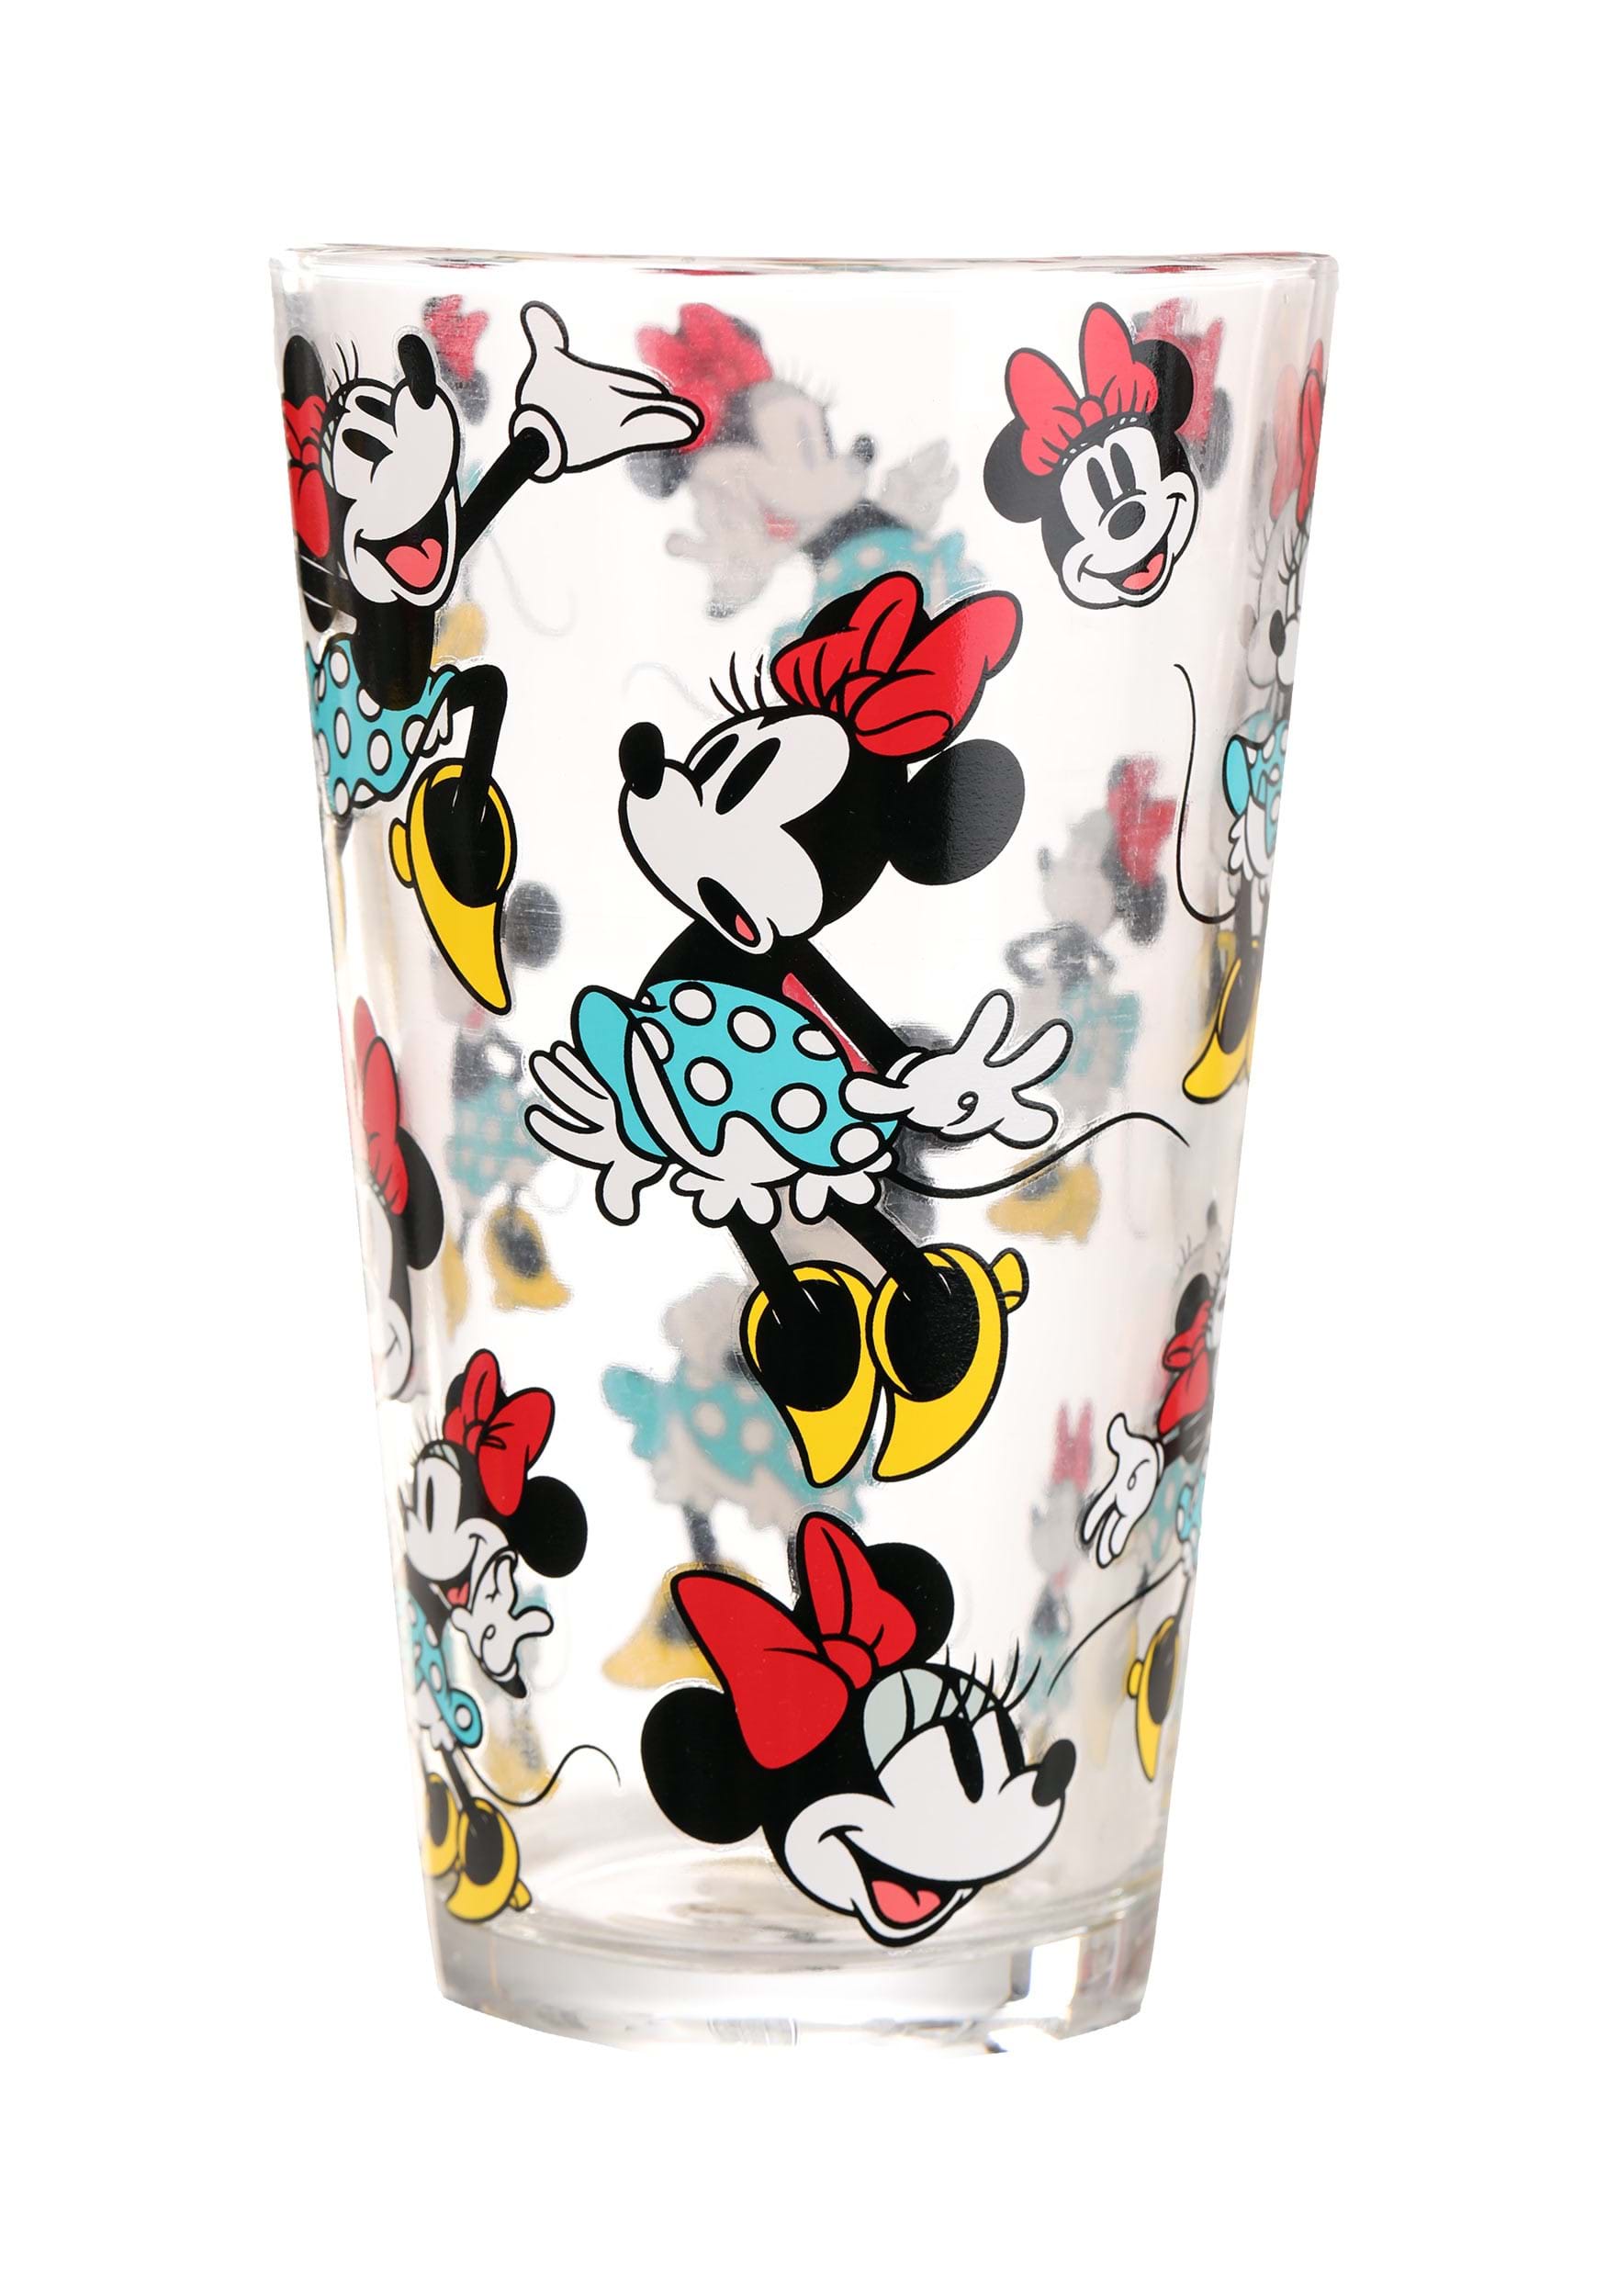 https://images.fun.com/products/87645/2-1-251833/disney-mickey-and-friends-tossed-poses-s-4-tumbler-alt-4.jpg